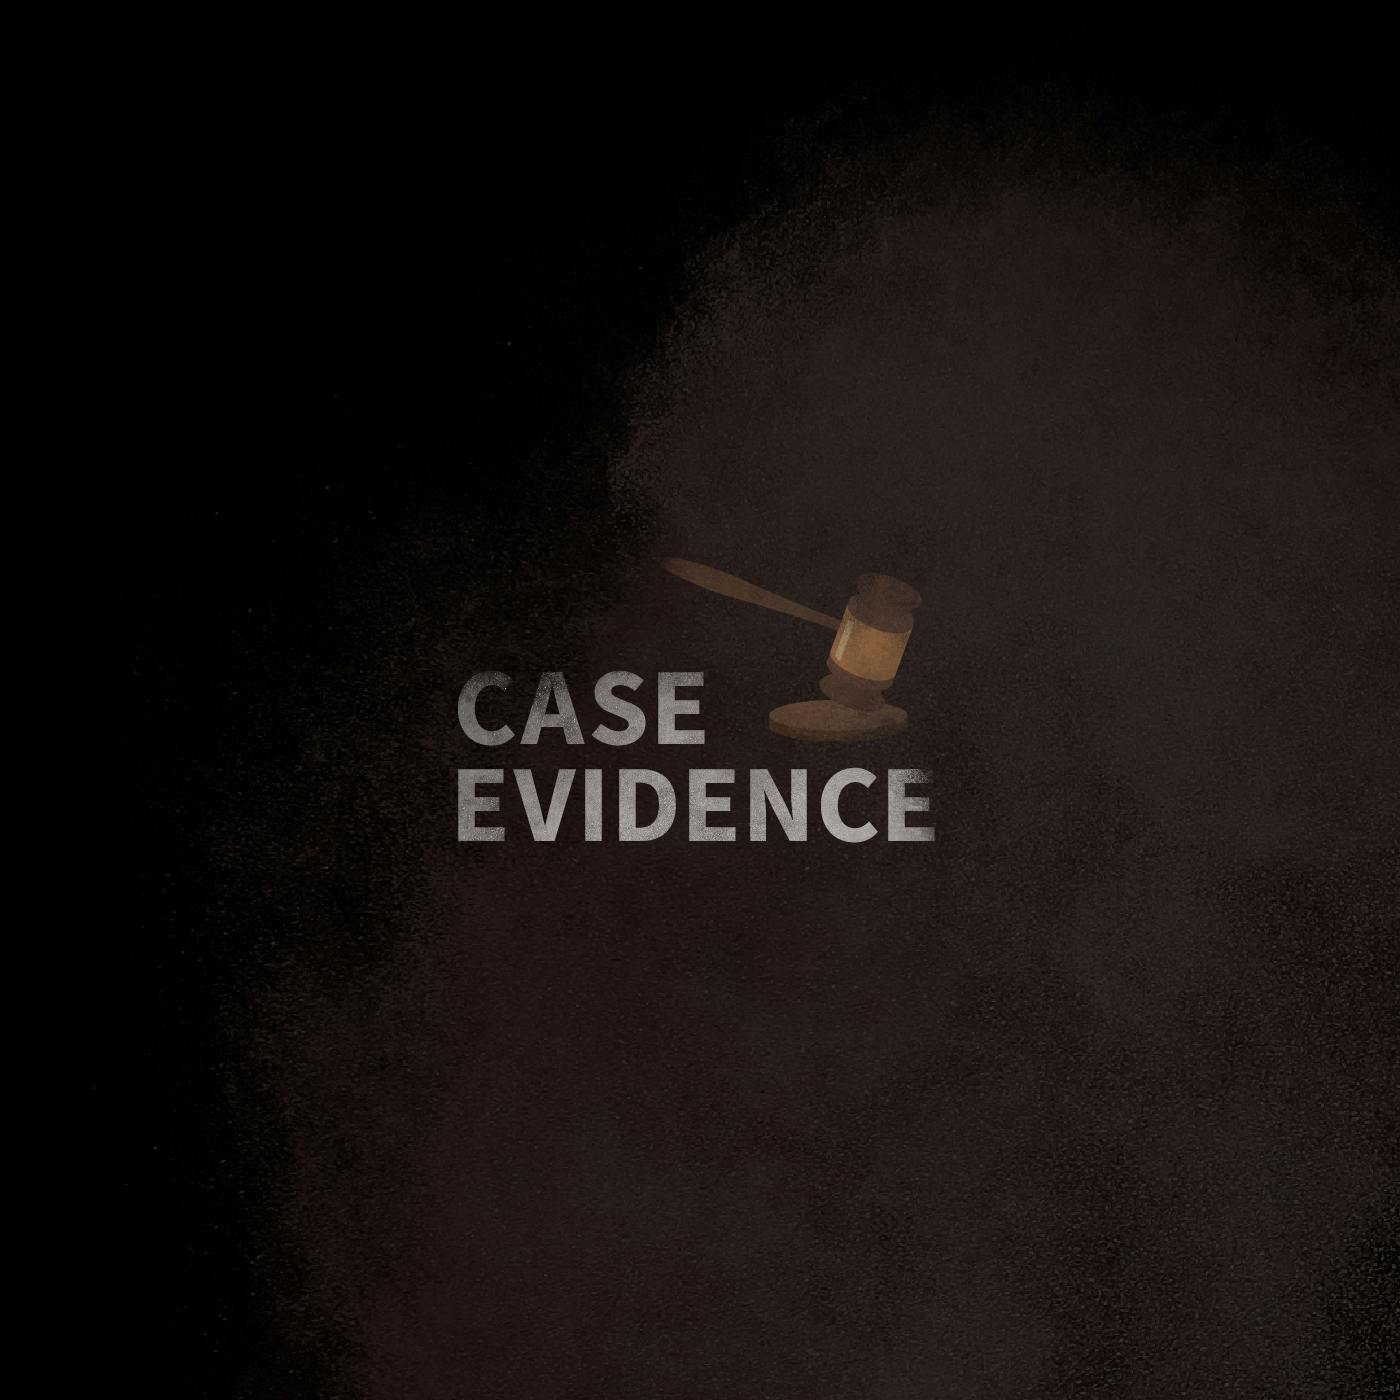 Case Evidence 06.12.17 by Tenderfoot TV